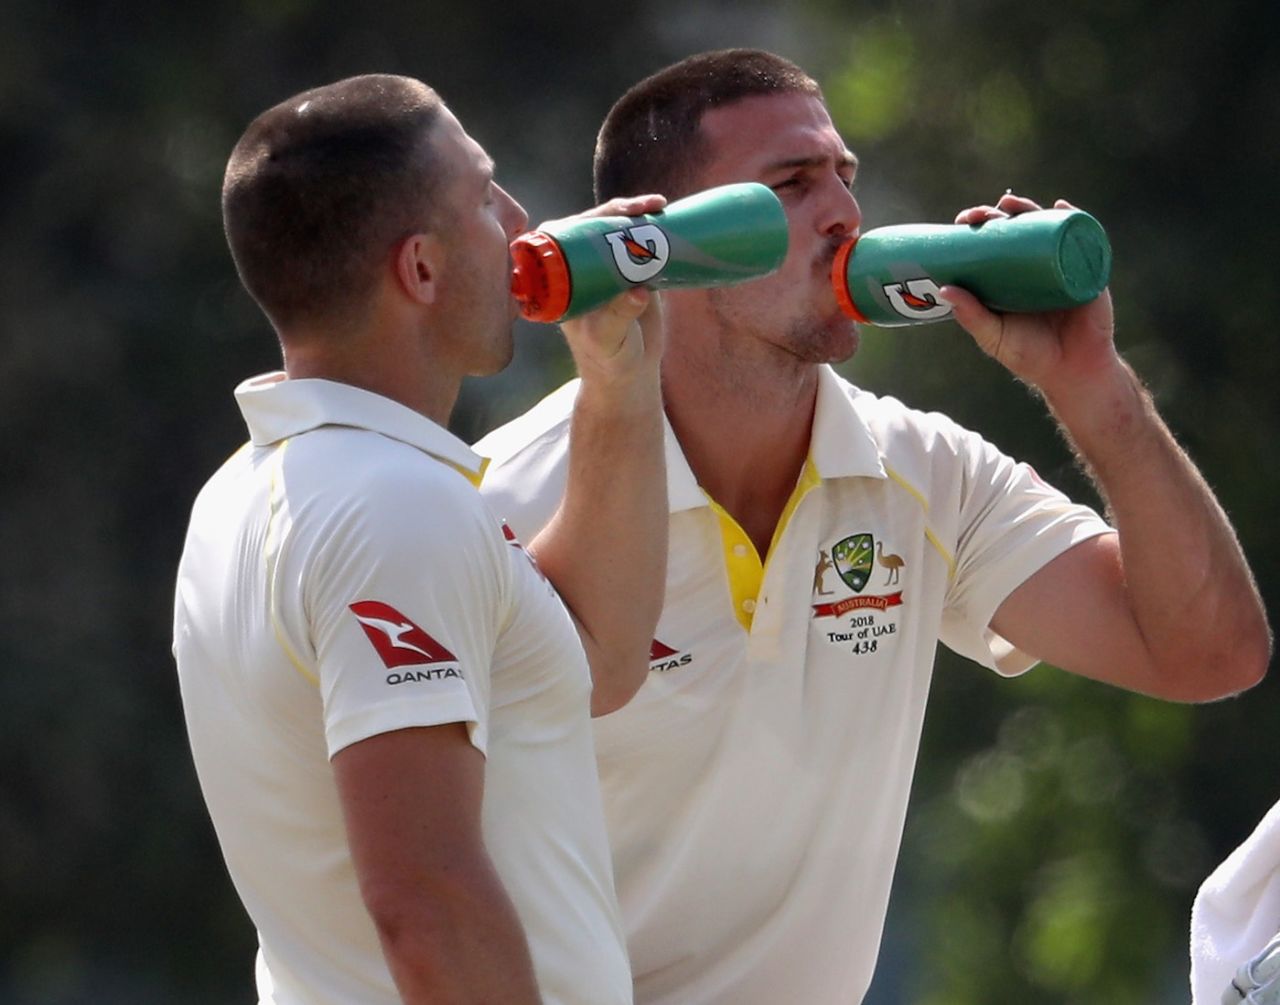 The Marsh brothers, Shaun and Mitchell, hydrate on a hot day, Pakistan A v Australians, 3rd day, Dubai, October 1, 2018